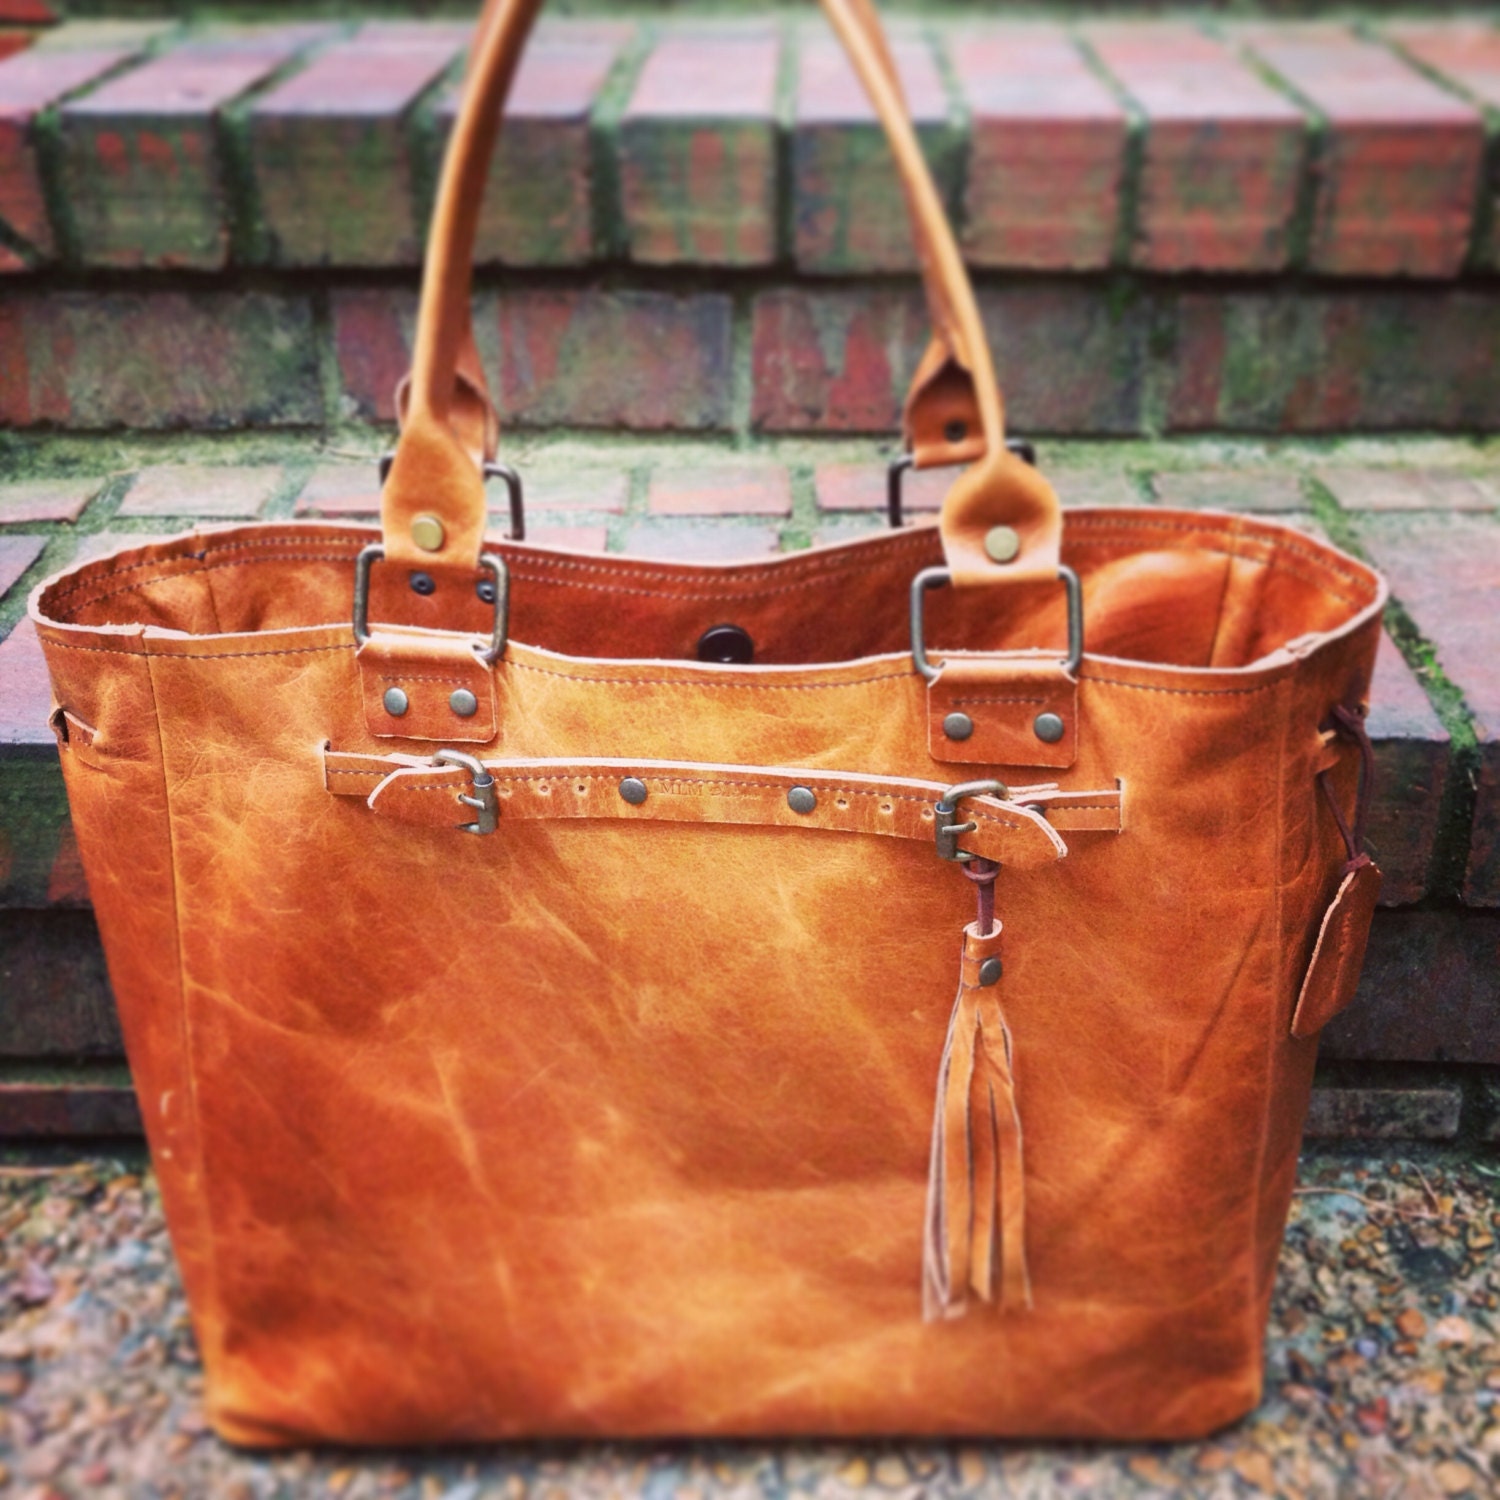 Distressed Brown Leather Oversized Handbag Tote Travelbag